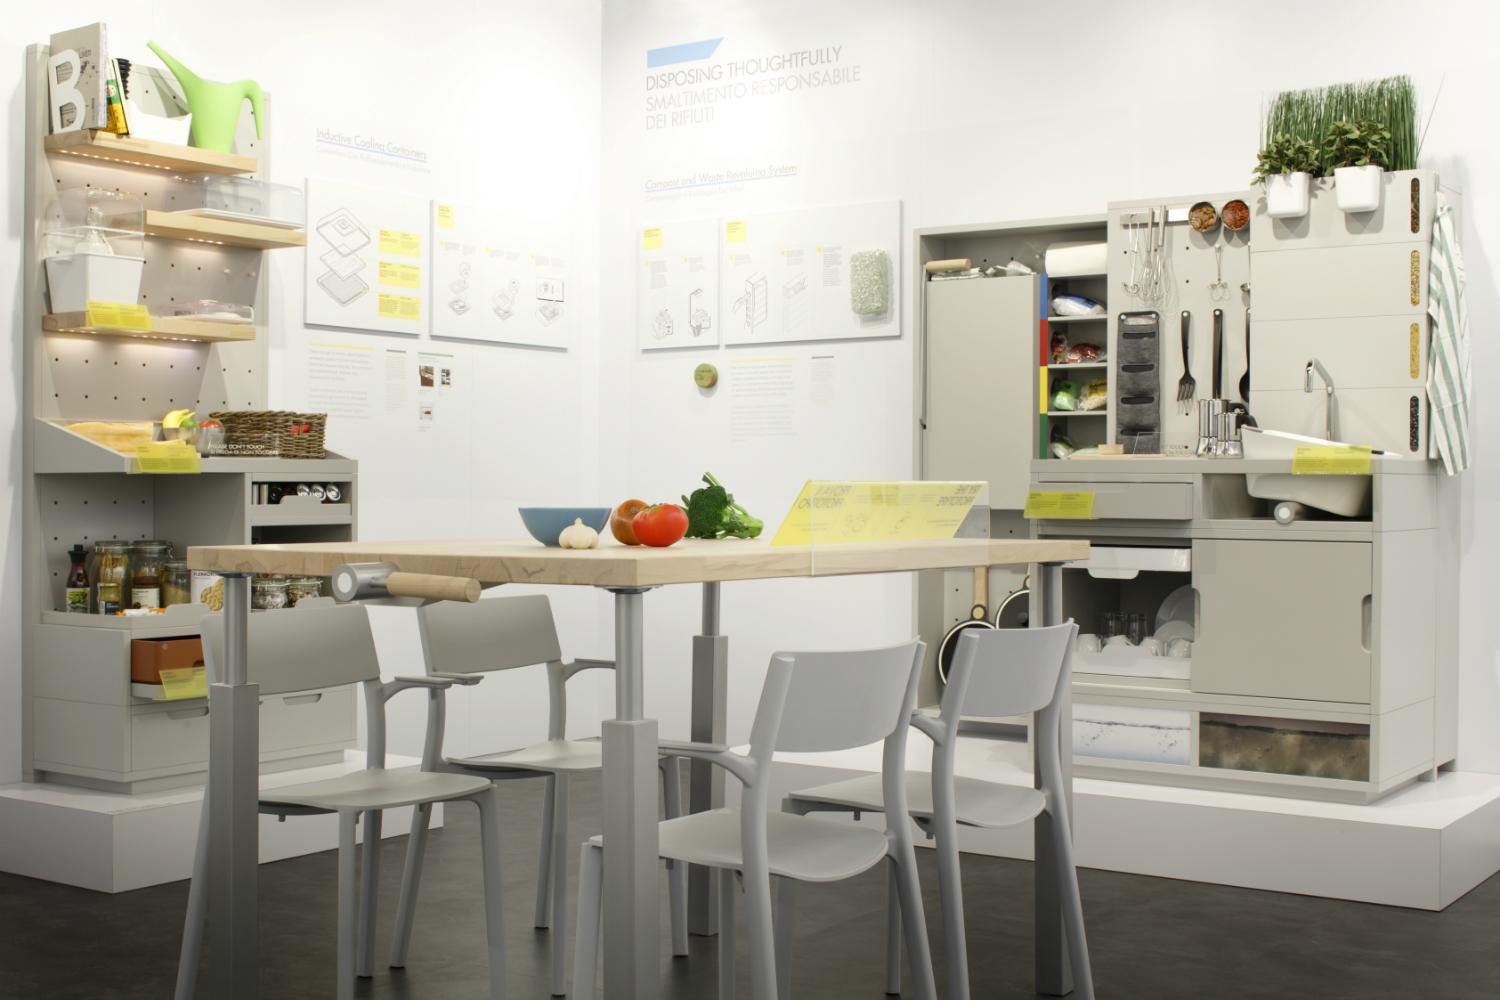 Concept Kitchen 2025 at IKEA Temporary